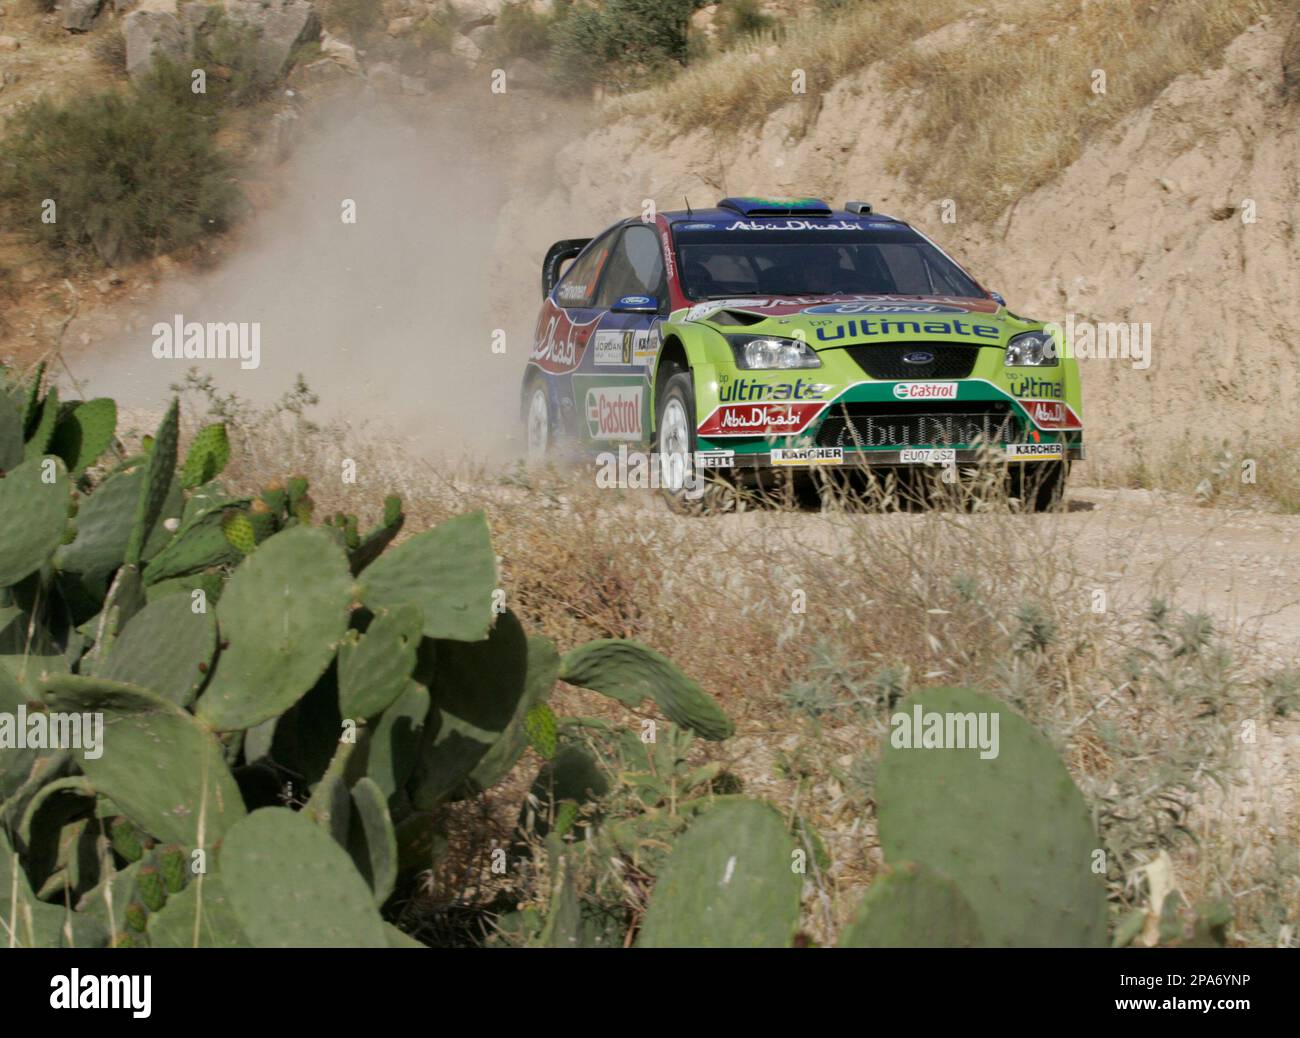 Finland's Mikko Hirvonen drives a Ford Focus RS WRCO'7 during the Third day  of the Jordan Rally at Wadi Shuaib out of Amman, Jordan, Sunday, April 27,  2008. (AP Photo/Nader Daoud Stock